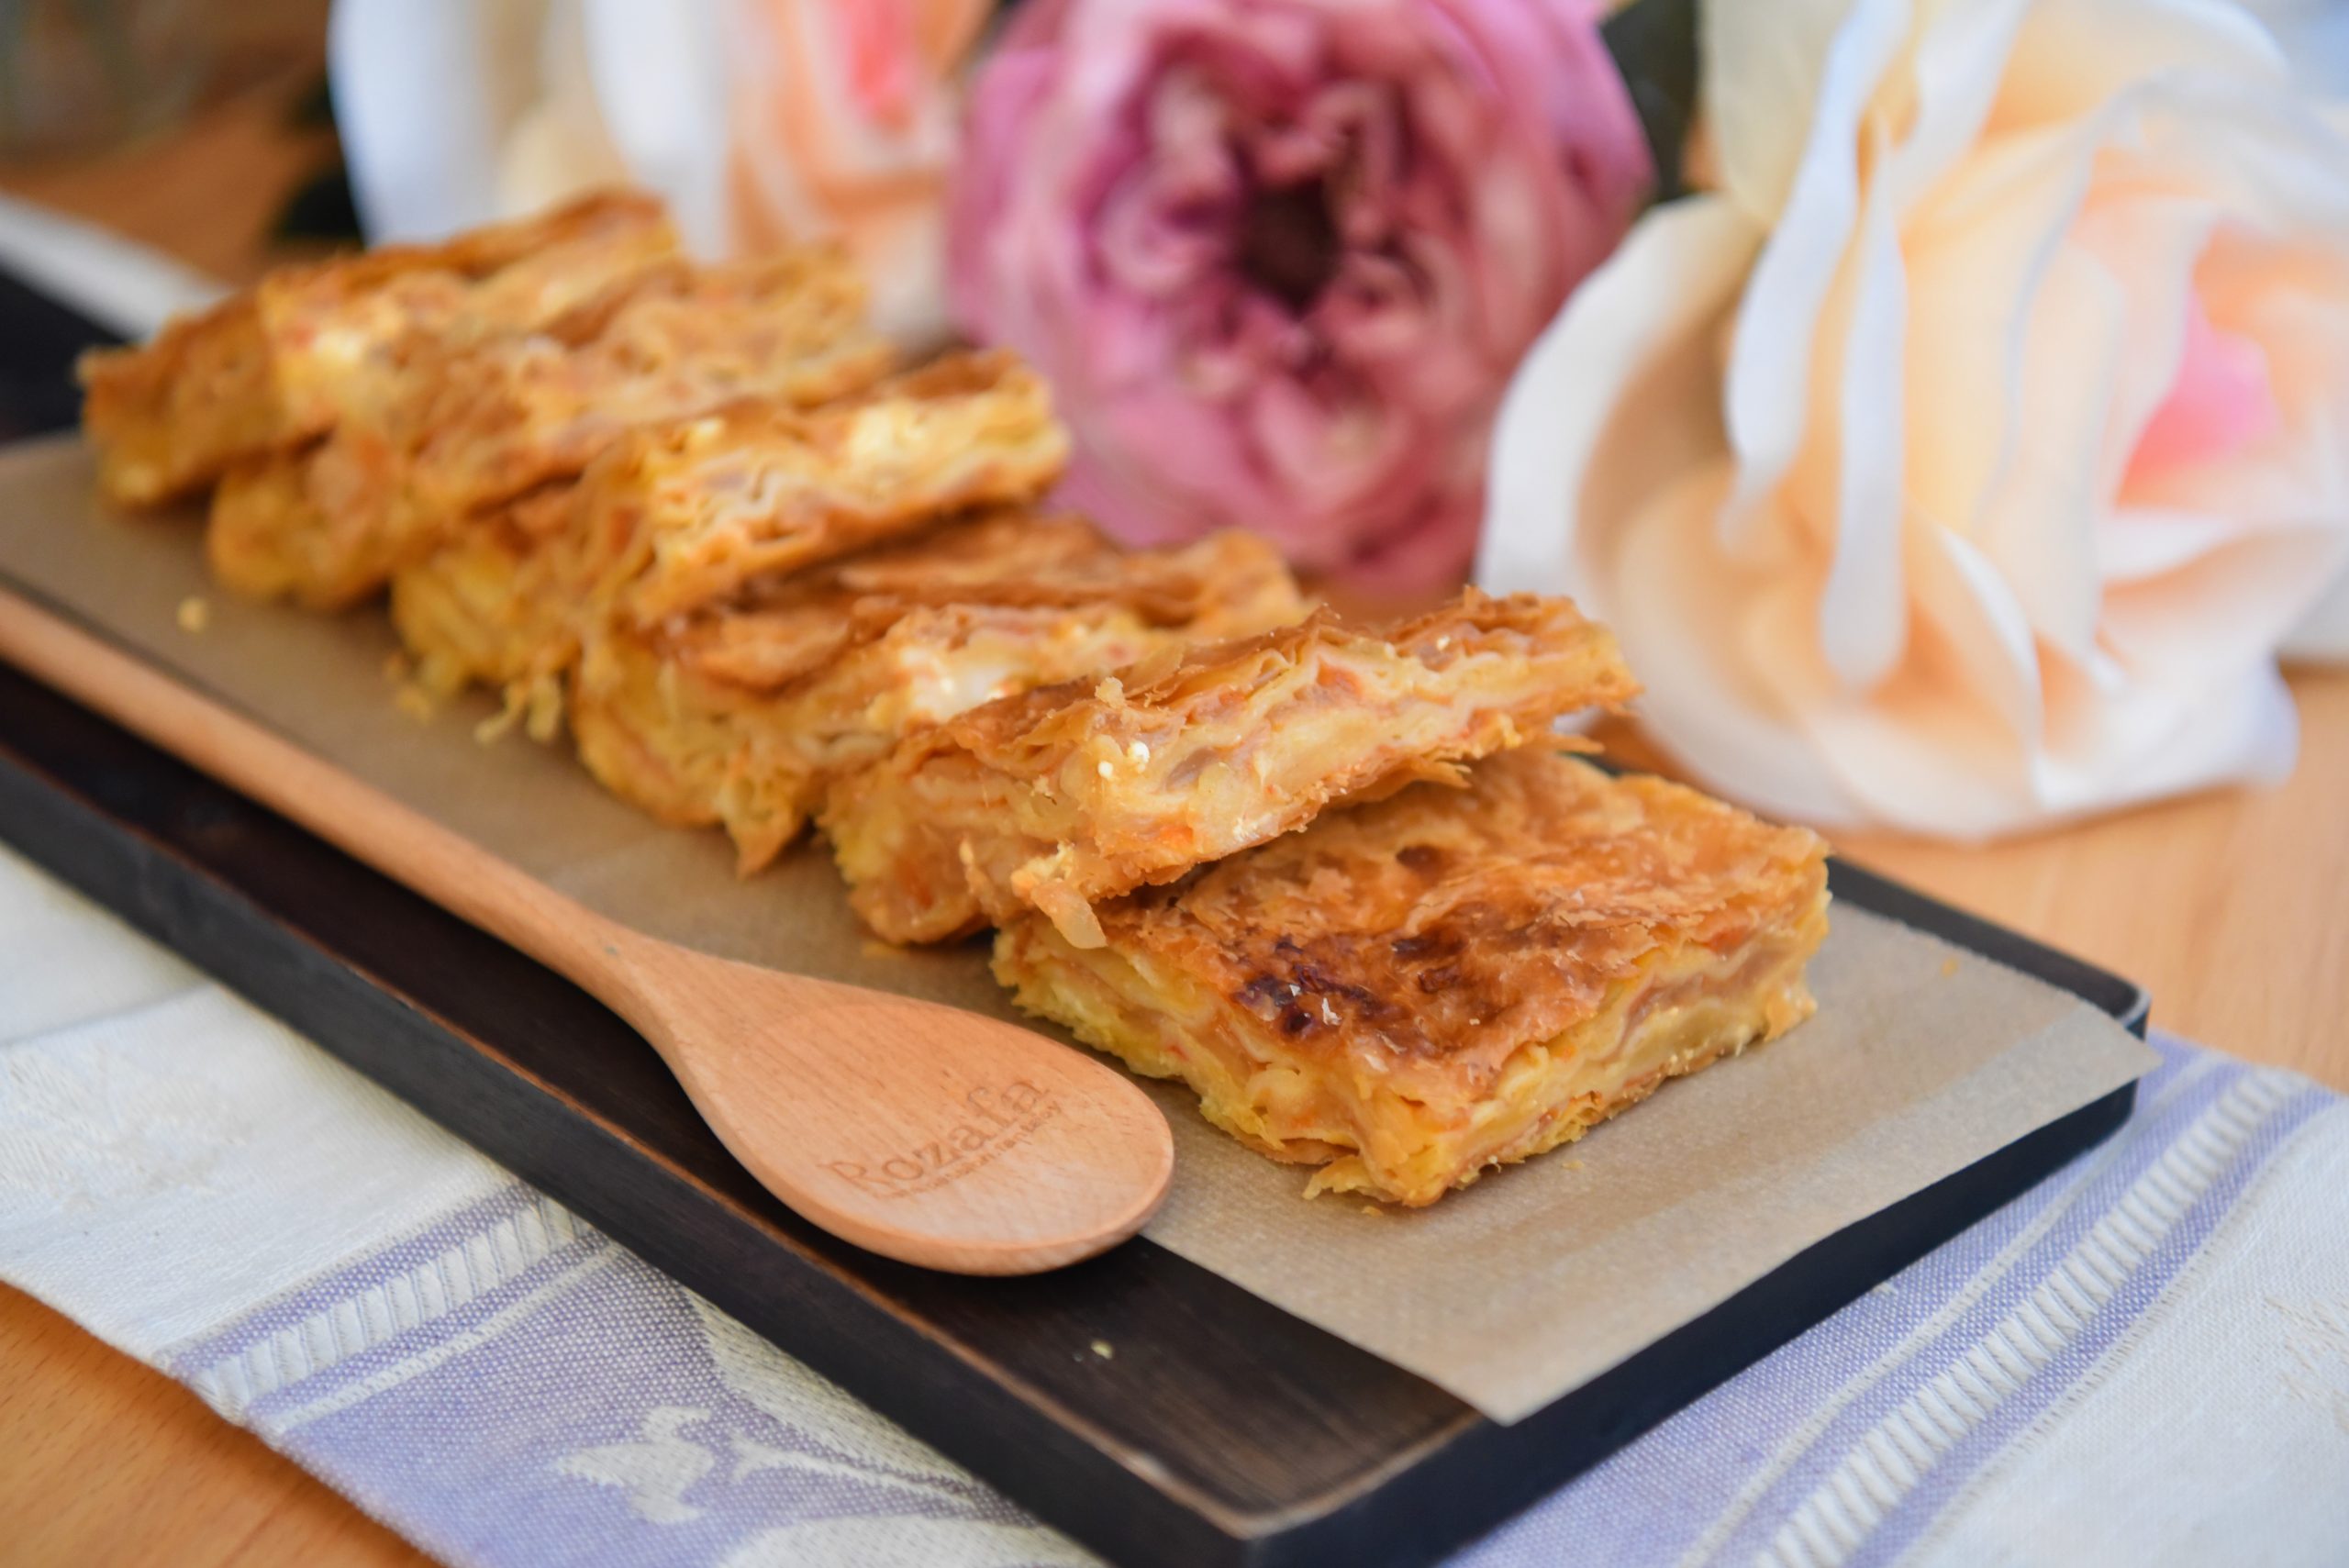 PIE WITH ONIONS AND TOMATOES (Byrek me qepë dhe domate)